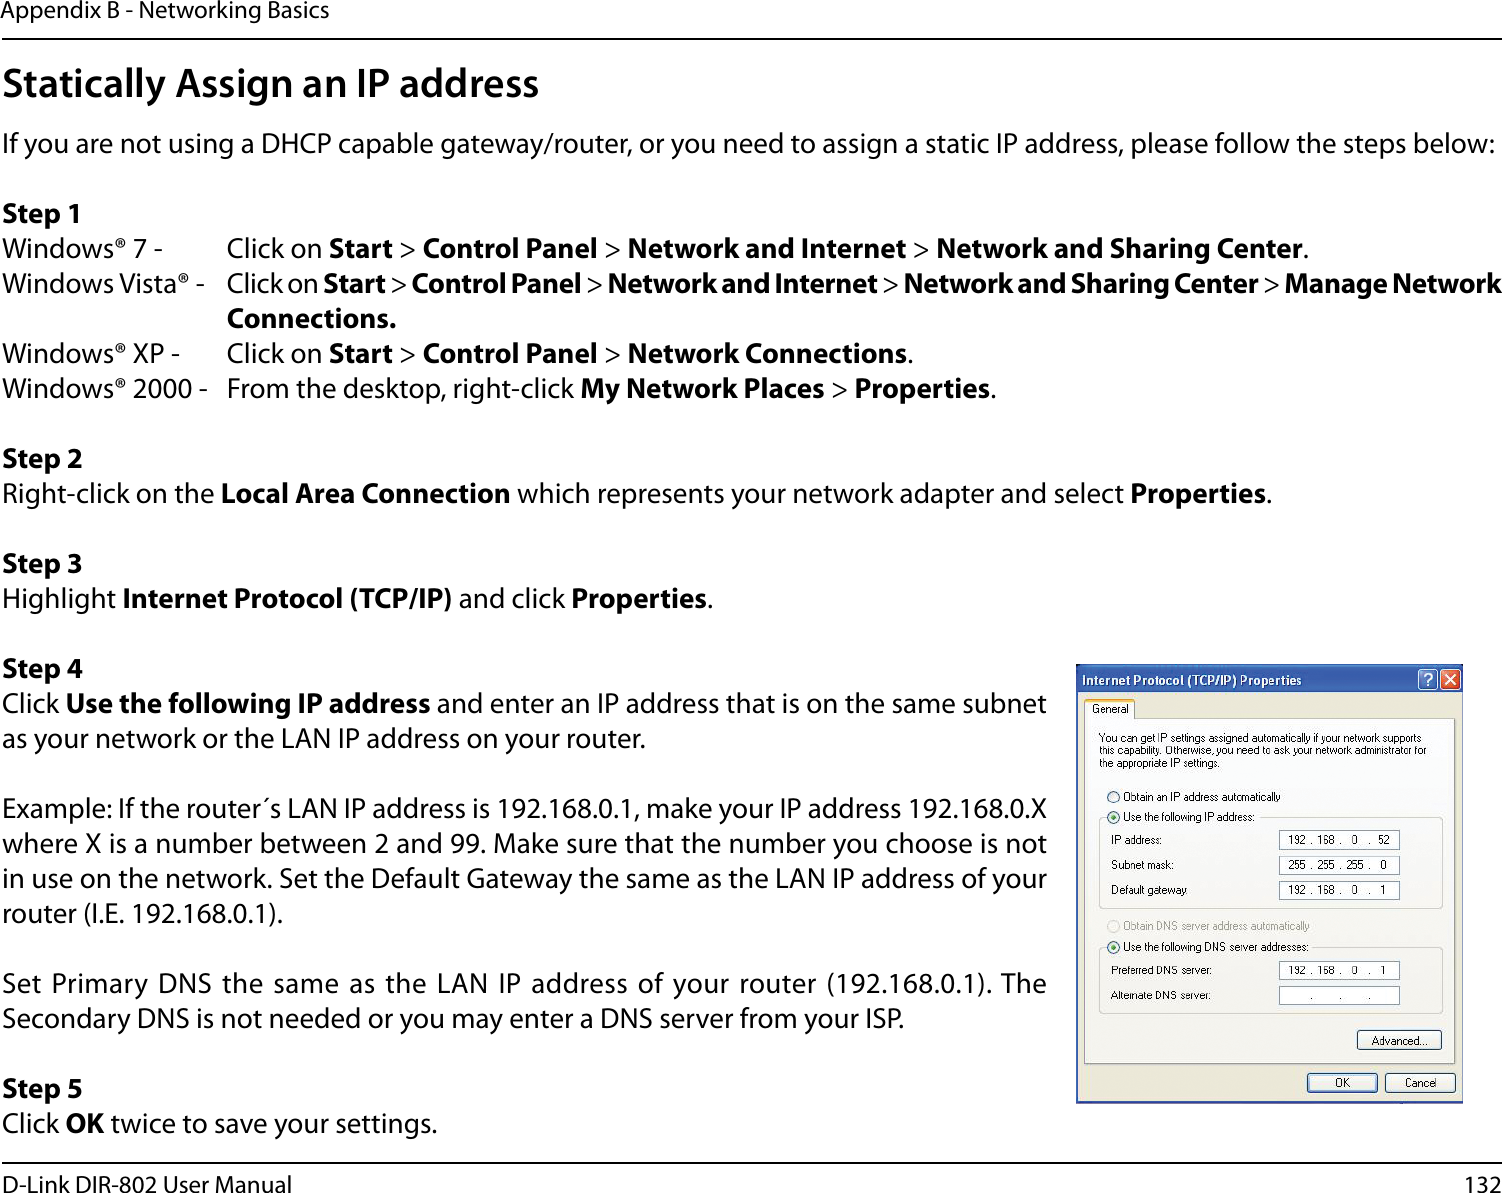 132D-Link DIR-802 User ManualAppendix B - Networking BasicsStatically Assign an IP addressIf you are not using a DHCP capable gateway/router, or you need to assign a static IP address, please follow the steps below:Step 1Windows® 7 -  Click on Start &gt; Control Panel &gt; Network and Internet &gt; Network and Sharing Center.Windows Vista® -  Click on Start &gt; Control Panel &gt; Network and Internet &gt; Network and Sharing Center &gt; Manage Network      Connections.Windows® XP -  Click on Start &gt; Control Panel &gt; Network Connections.Windows® 2000 -  From the desktop, right-click My Network Places &gt; Properties.Step 2Right-click on the Local Area Connection which represents your network adapter and select Properties.Step 3Highlight Internet Protocol (TCP/IP) and click Properties.Step 4Click Use the following IP address and enter an IP address that is on the same subnet as your network or the LAN IP address on your router. Example: If the router´s LAN IP address is 192.168.0.1, make your IP address 192.168.0.X where X is a number between 2 and 99. Make sure that the number you choose is not in use on the network. Set the Default Gateway the same as the LAN IP address of your router (I.E. 192.168.0.1). Set Primary DNS  the same  as the  LAN IP  address of your router (192.168.0.1). The Secondary DNS is not needed or you may enter a DNS server from your ISP.Step 5Click OK twice to save your settings.